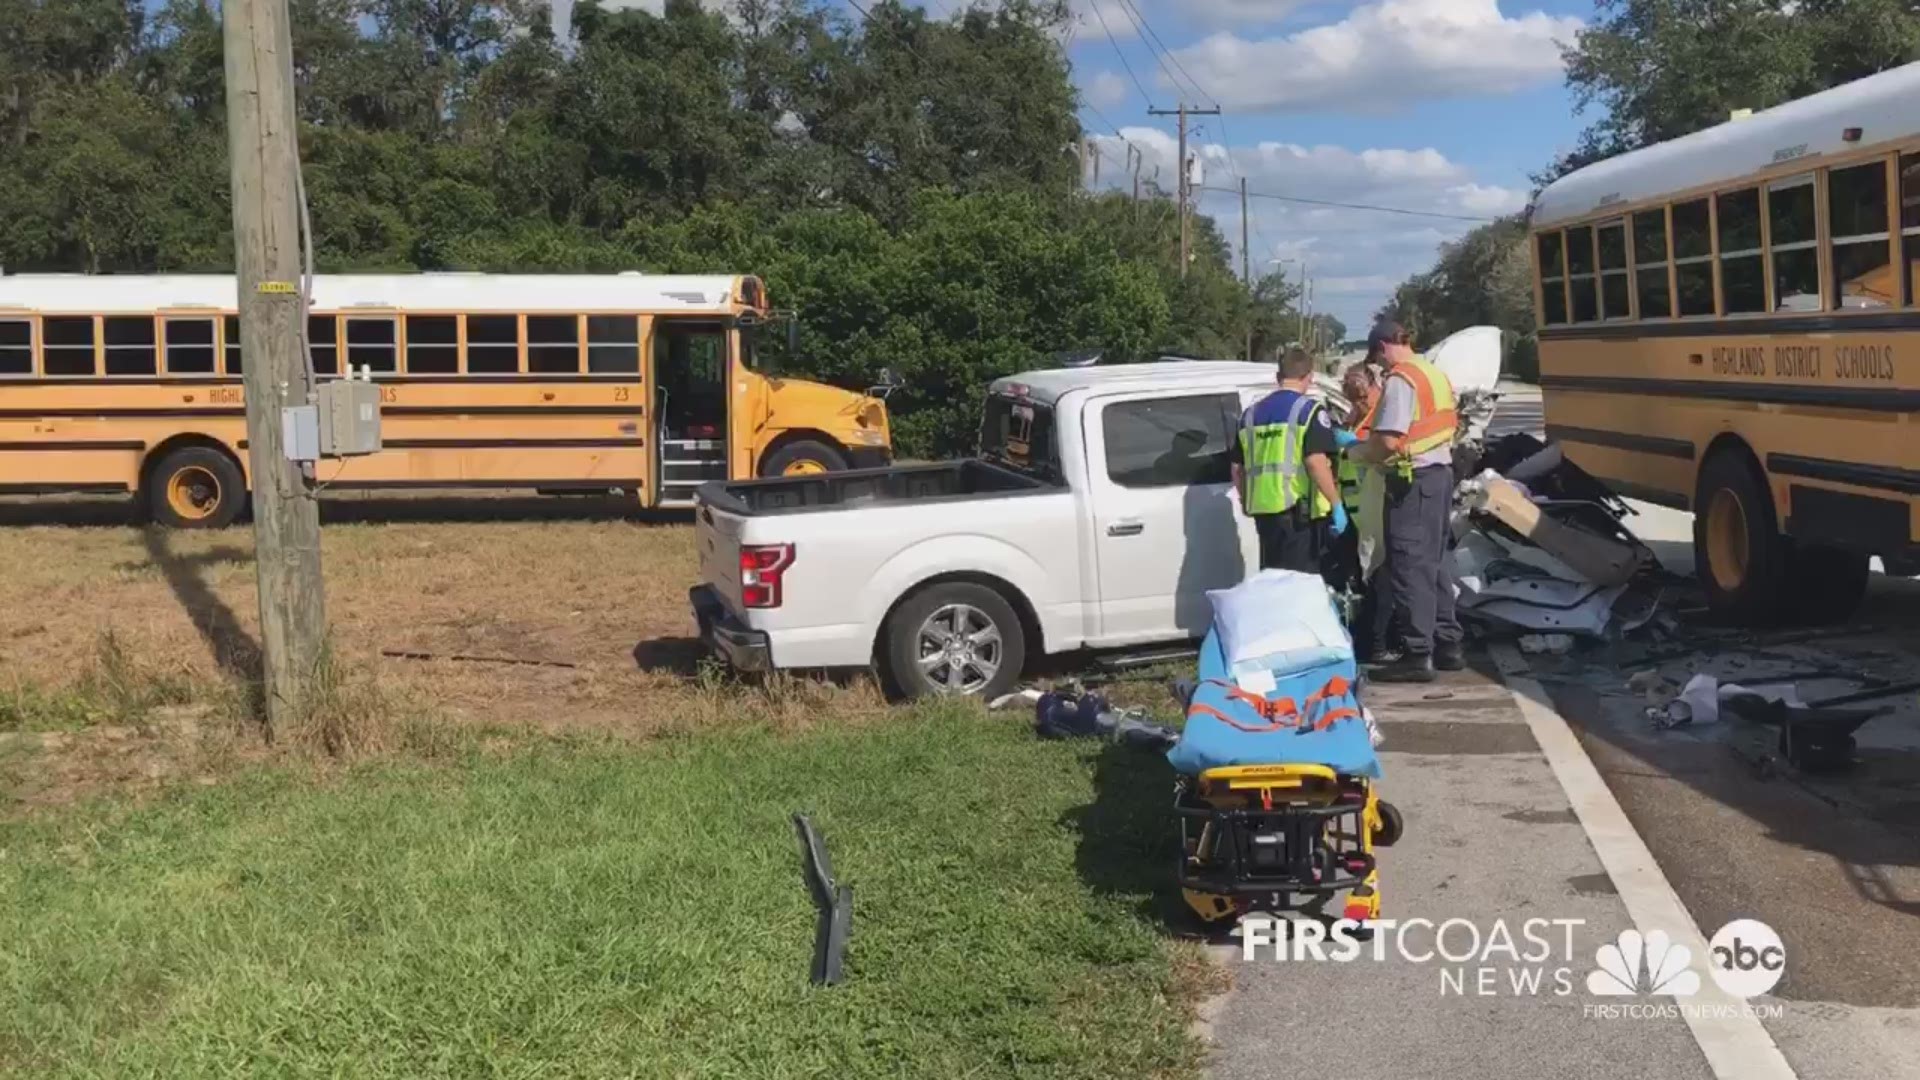 A school bus in Sebring, Florida carrying 20 Avon Park High School students was struck head-on by a Ford F-150 on East Cornell Street. Three people were injured.